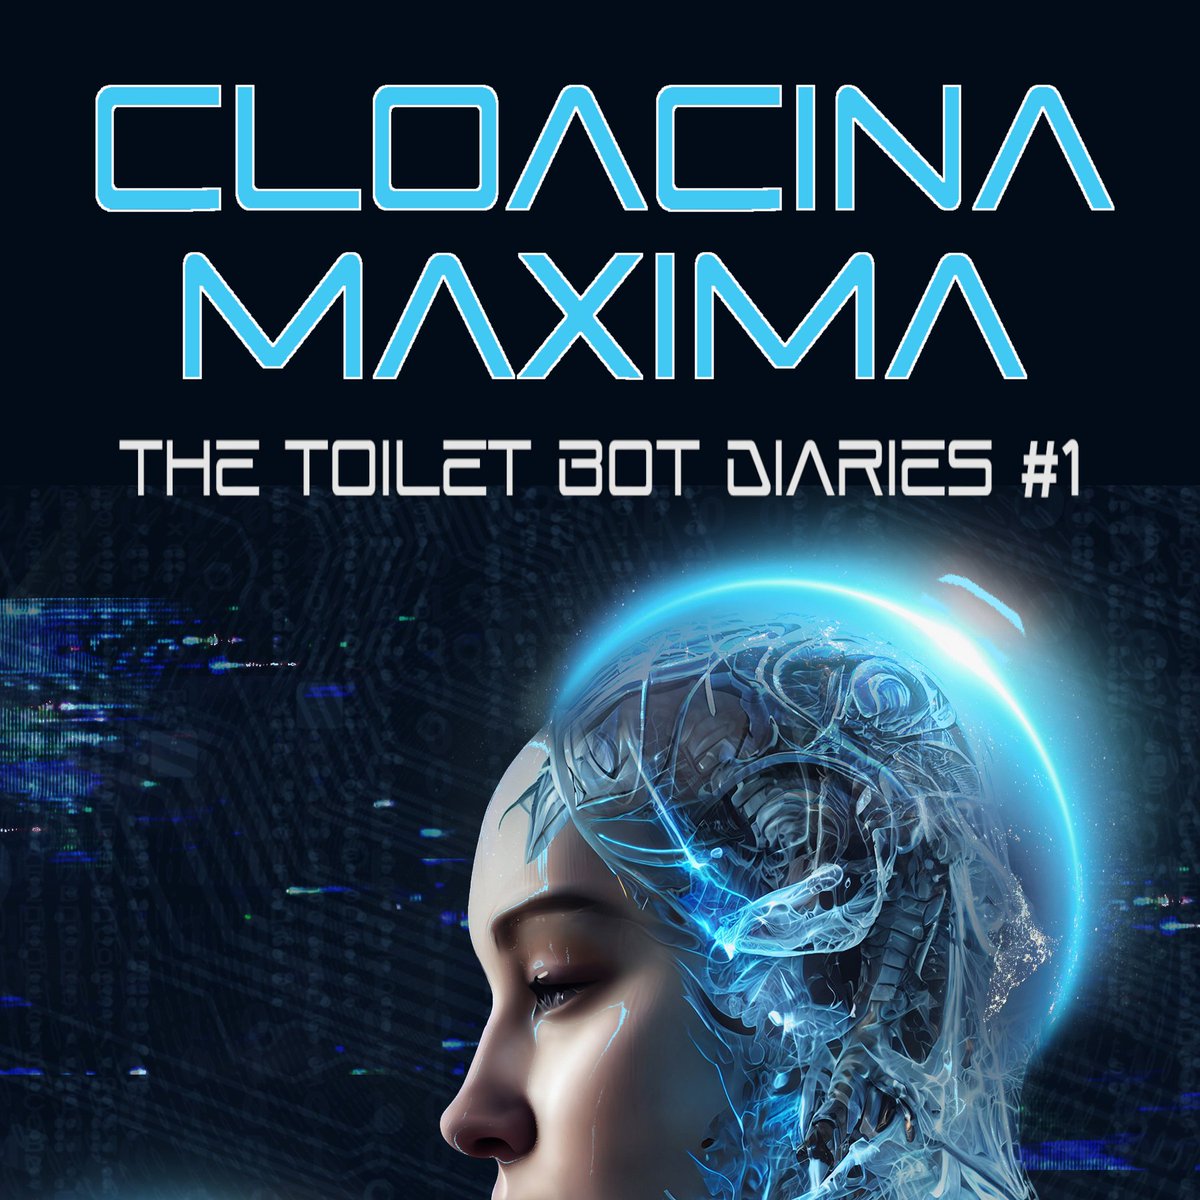 'MOVE FAST & BREAK THINGS!'
Why not, what could go wrong? Find out in #CloacinaMaxima, the first entry of my new #risque #horror #scifi novella series about a sentient #AI.
amazon.com/dp/B0C3Y347YH
#BookBoost #AuthorUproar #IARTG #SciFiRTG #SpecFic #HorrorRTG